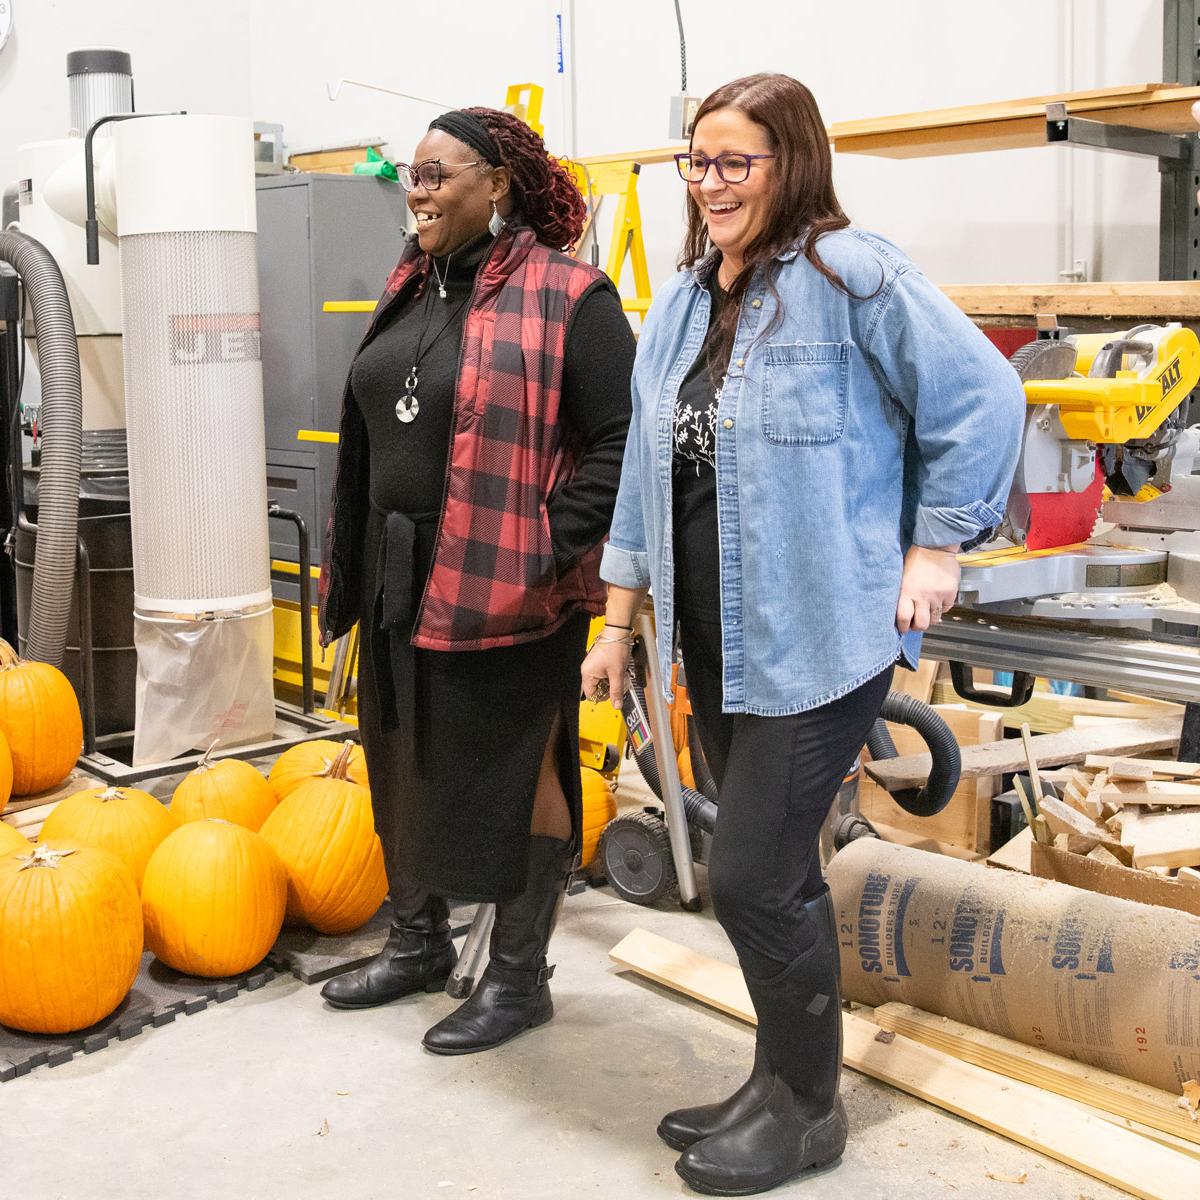 outh Employment Specialist Nashanda McGee-Browman (left) and Student Support Specialist Alyssa Pratt lead a tour through the SEA woodshop, where elements of the school garden space were built by students.